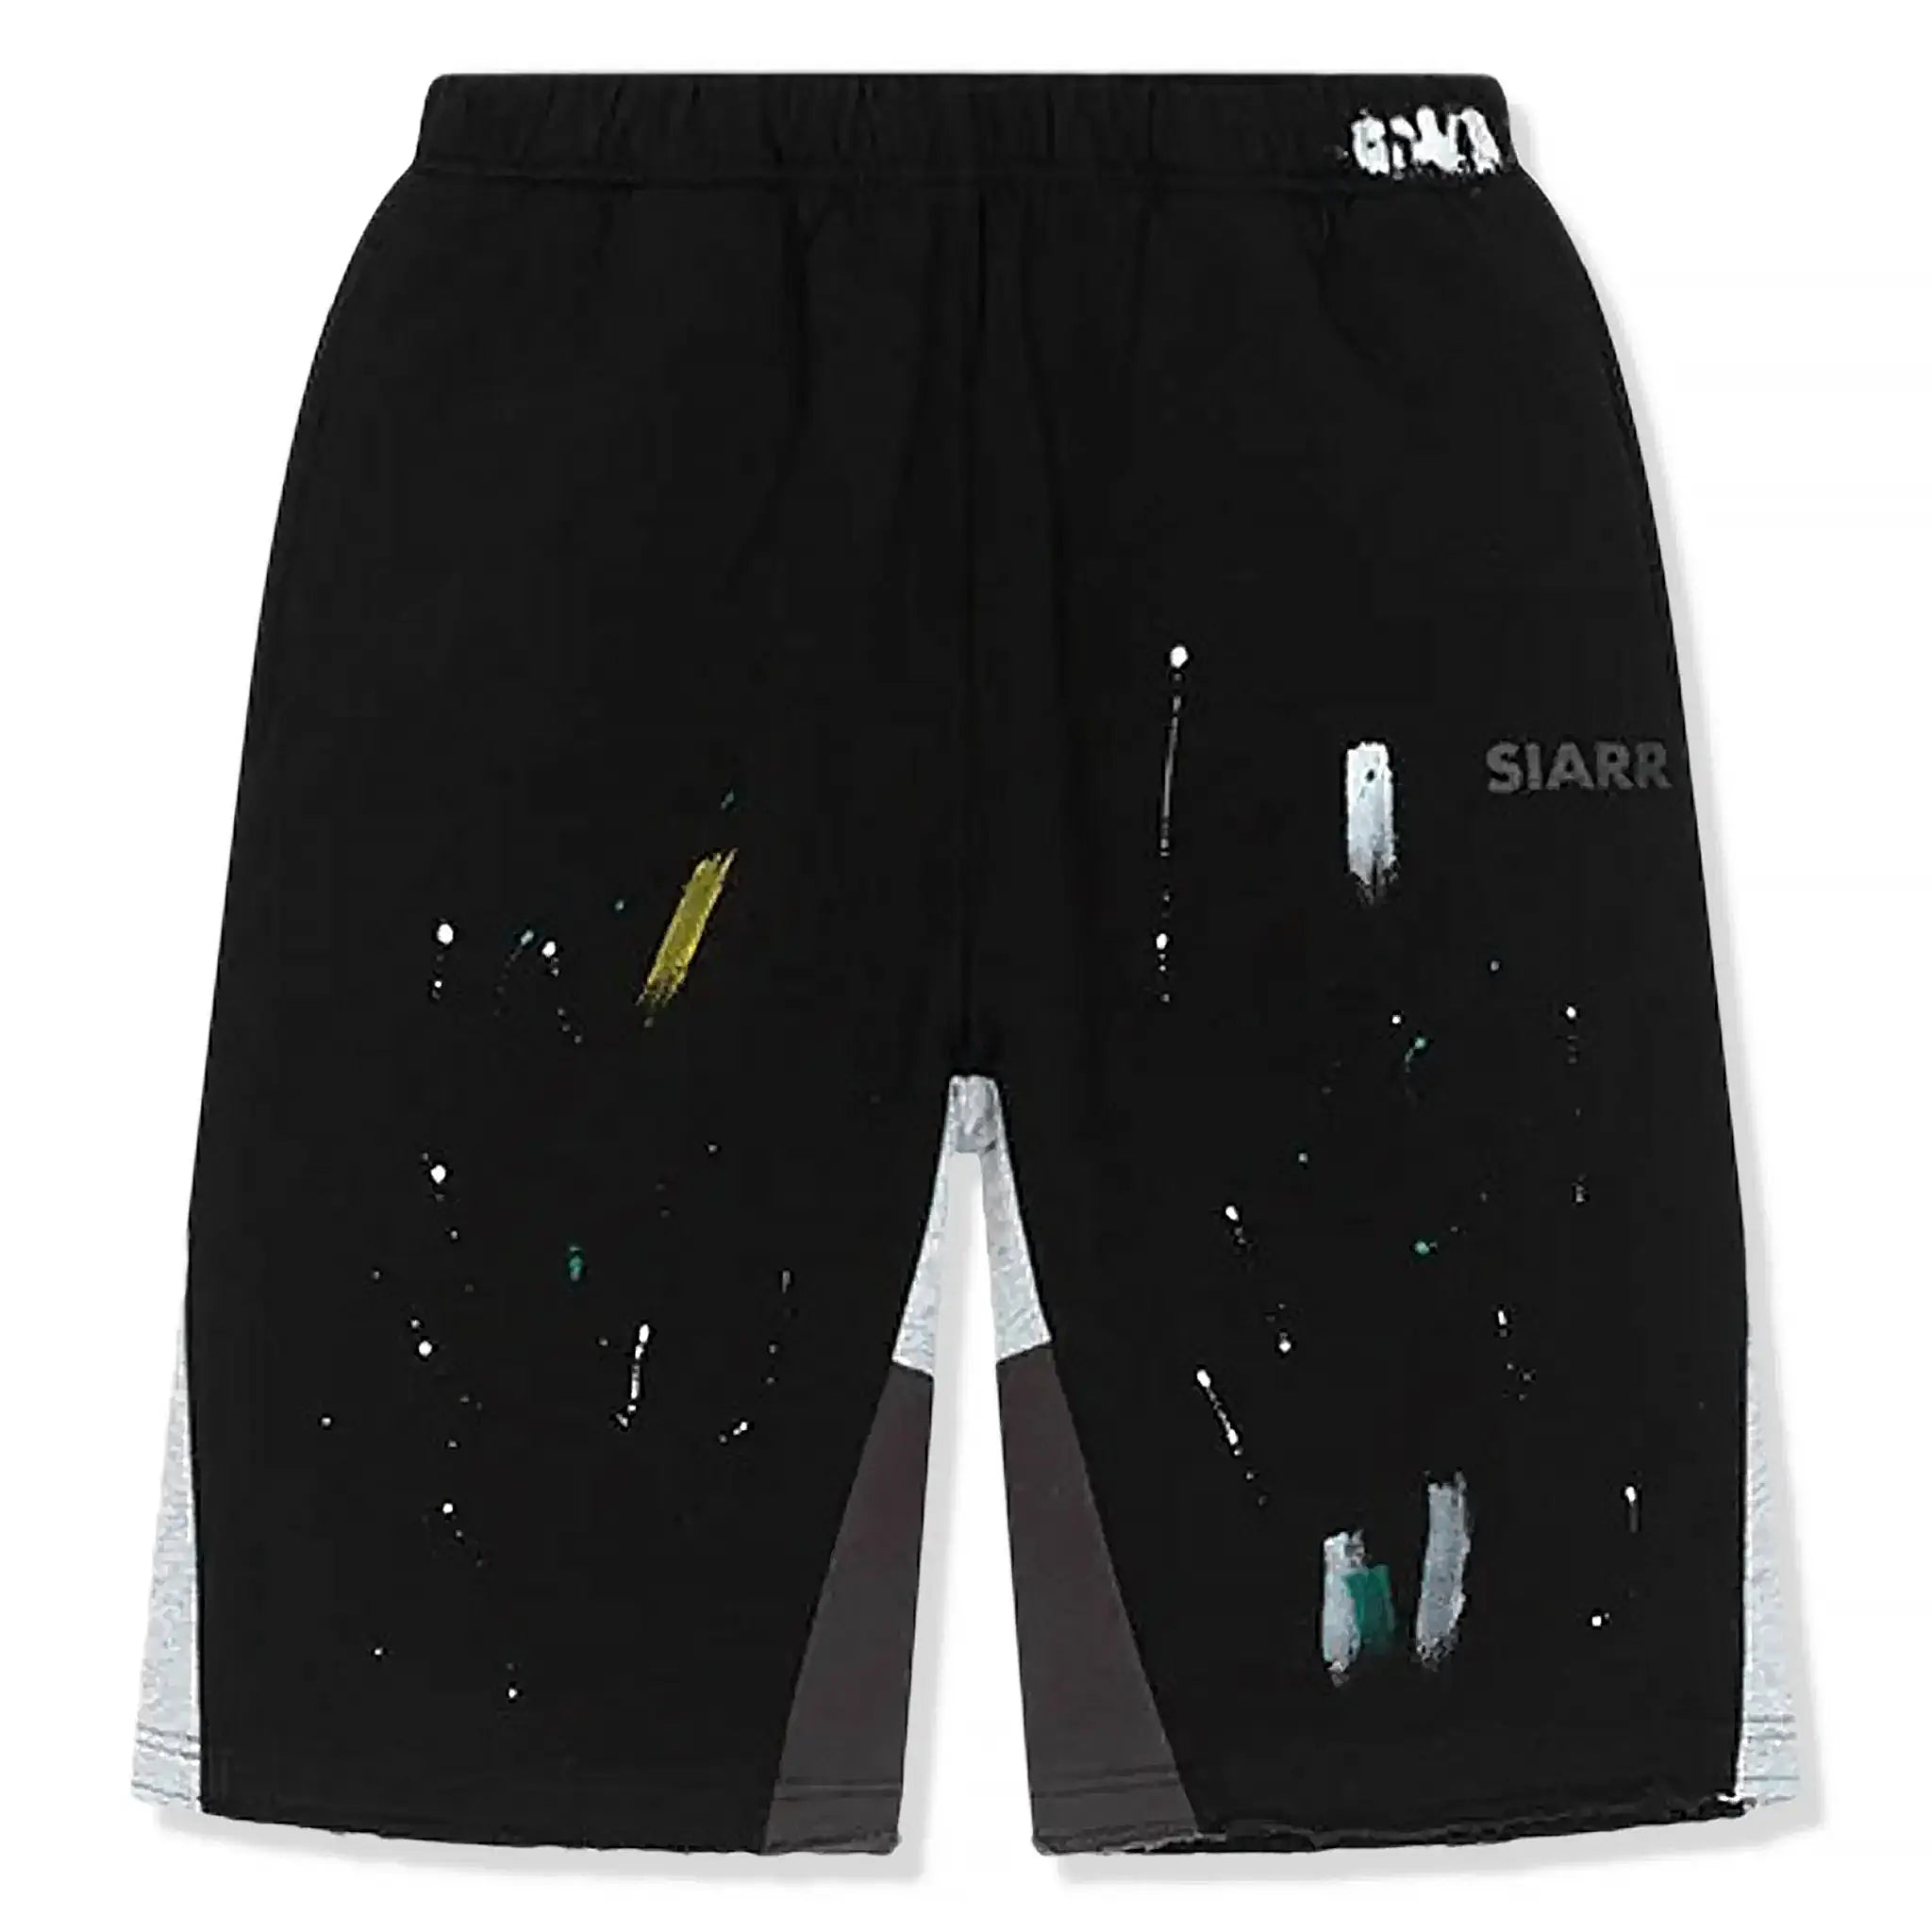 Front view of SIARR Paint Shorts Black